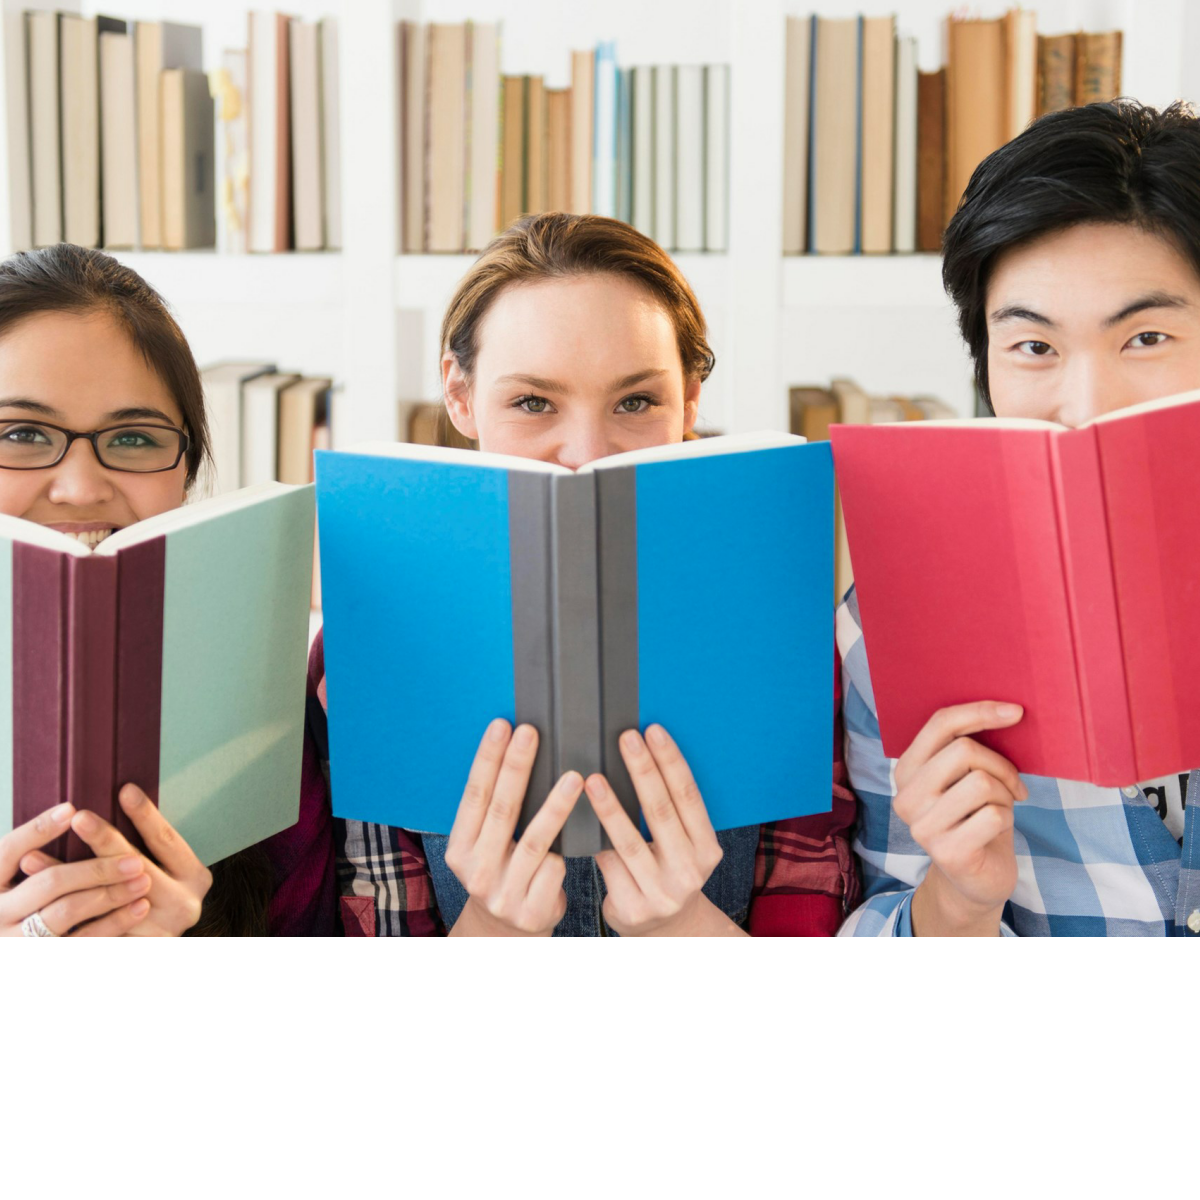 Photo of 3 smiling teens with books in front of their faces